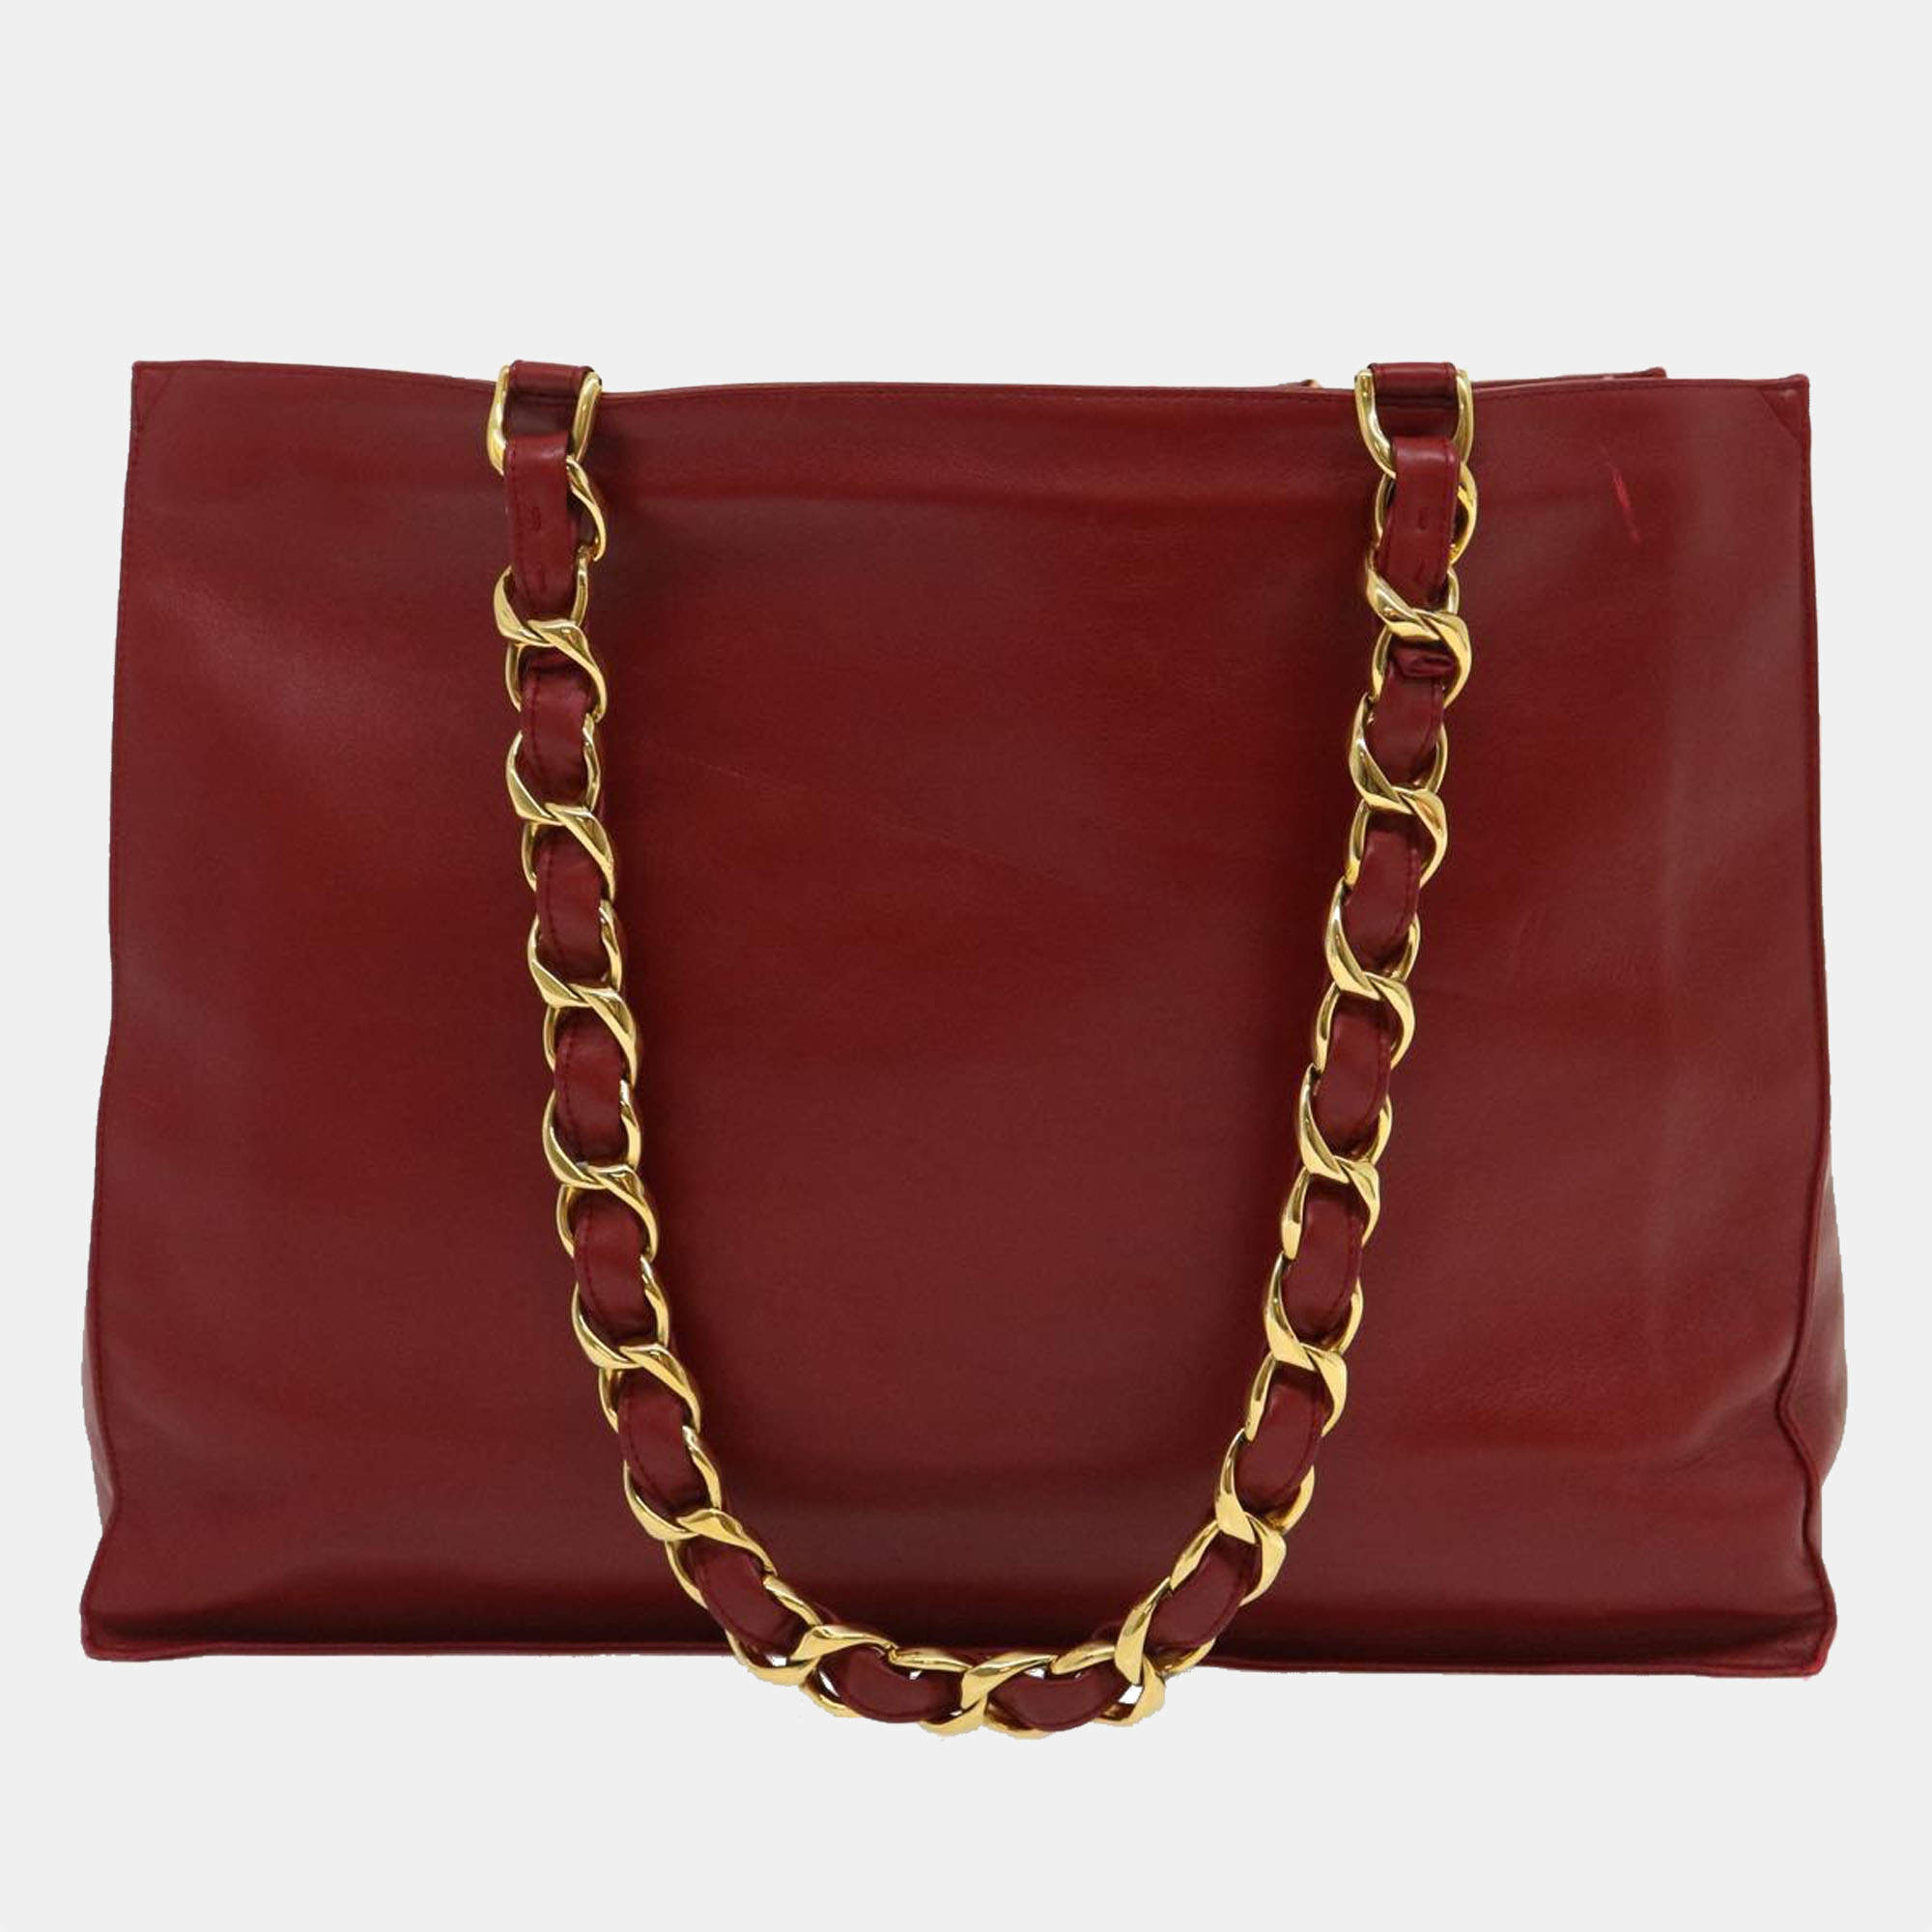 Chanel Vintage Red Leather CC Chain Tote Bag Chanel | TLC